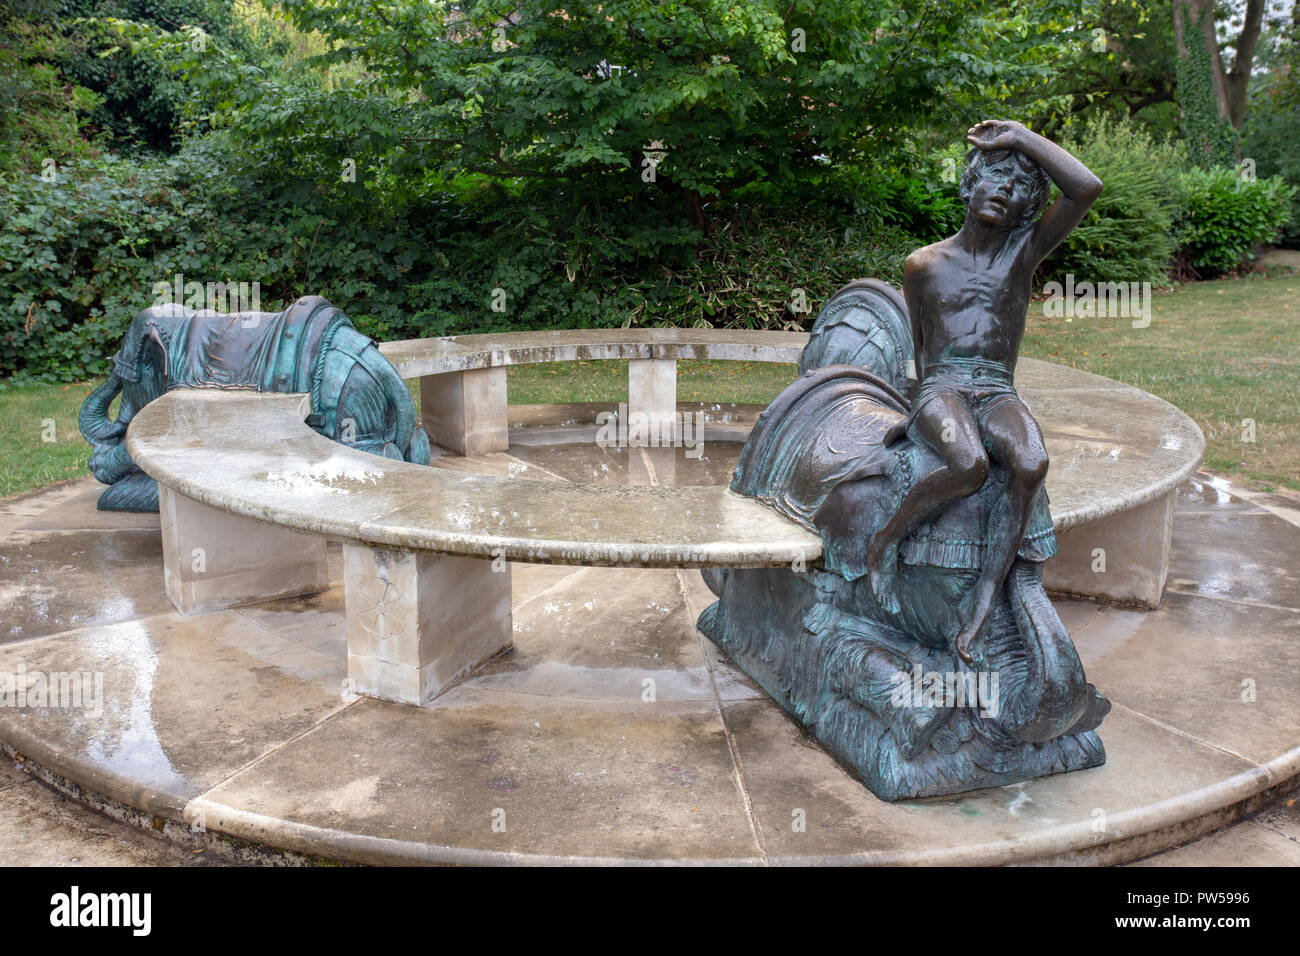 JEPHSON GARDENS, LEAMINGTON SPA, ENGLAND - August 10, 2018: An unusual bronze and marble seat sculpture with elephants and a boy in Jephson Gardens, L Stock Photo